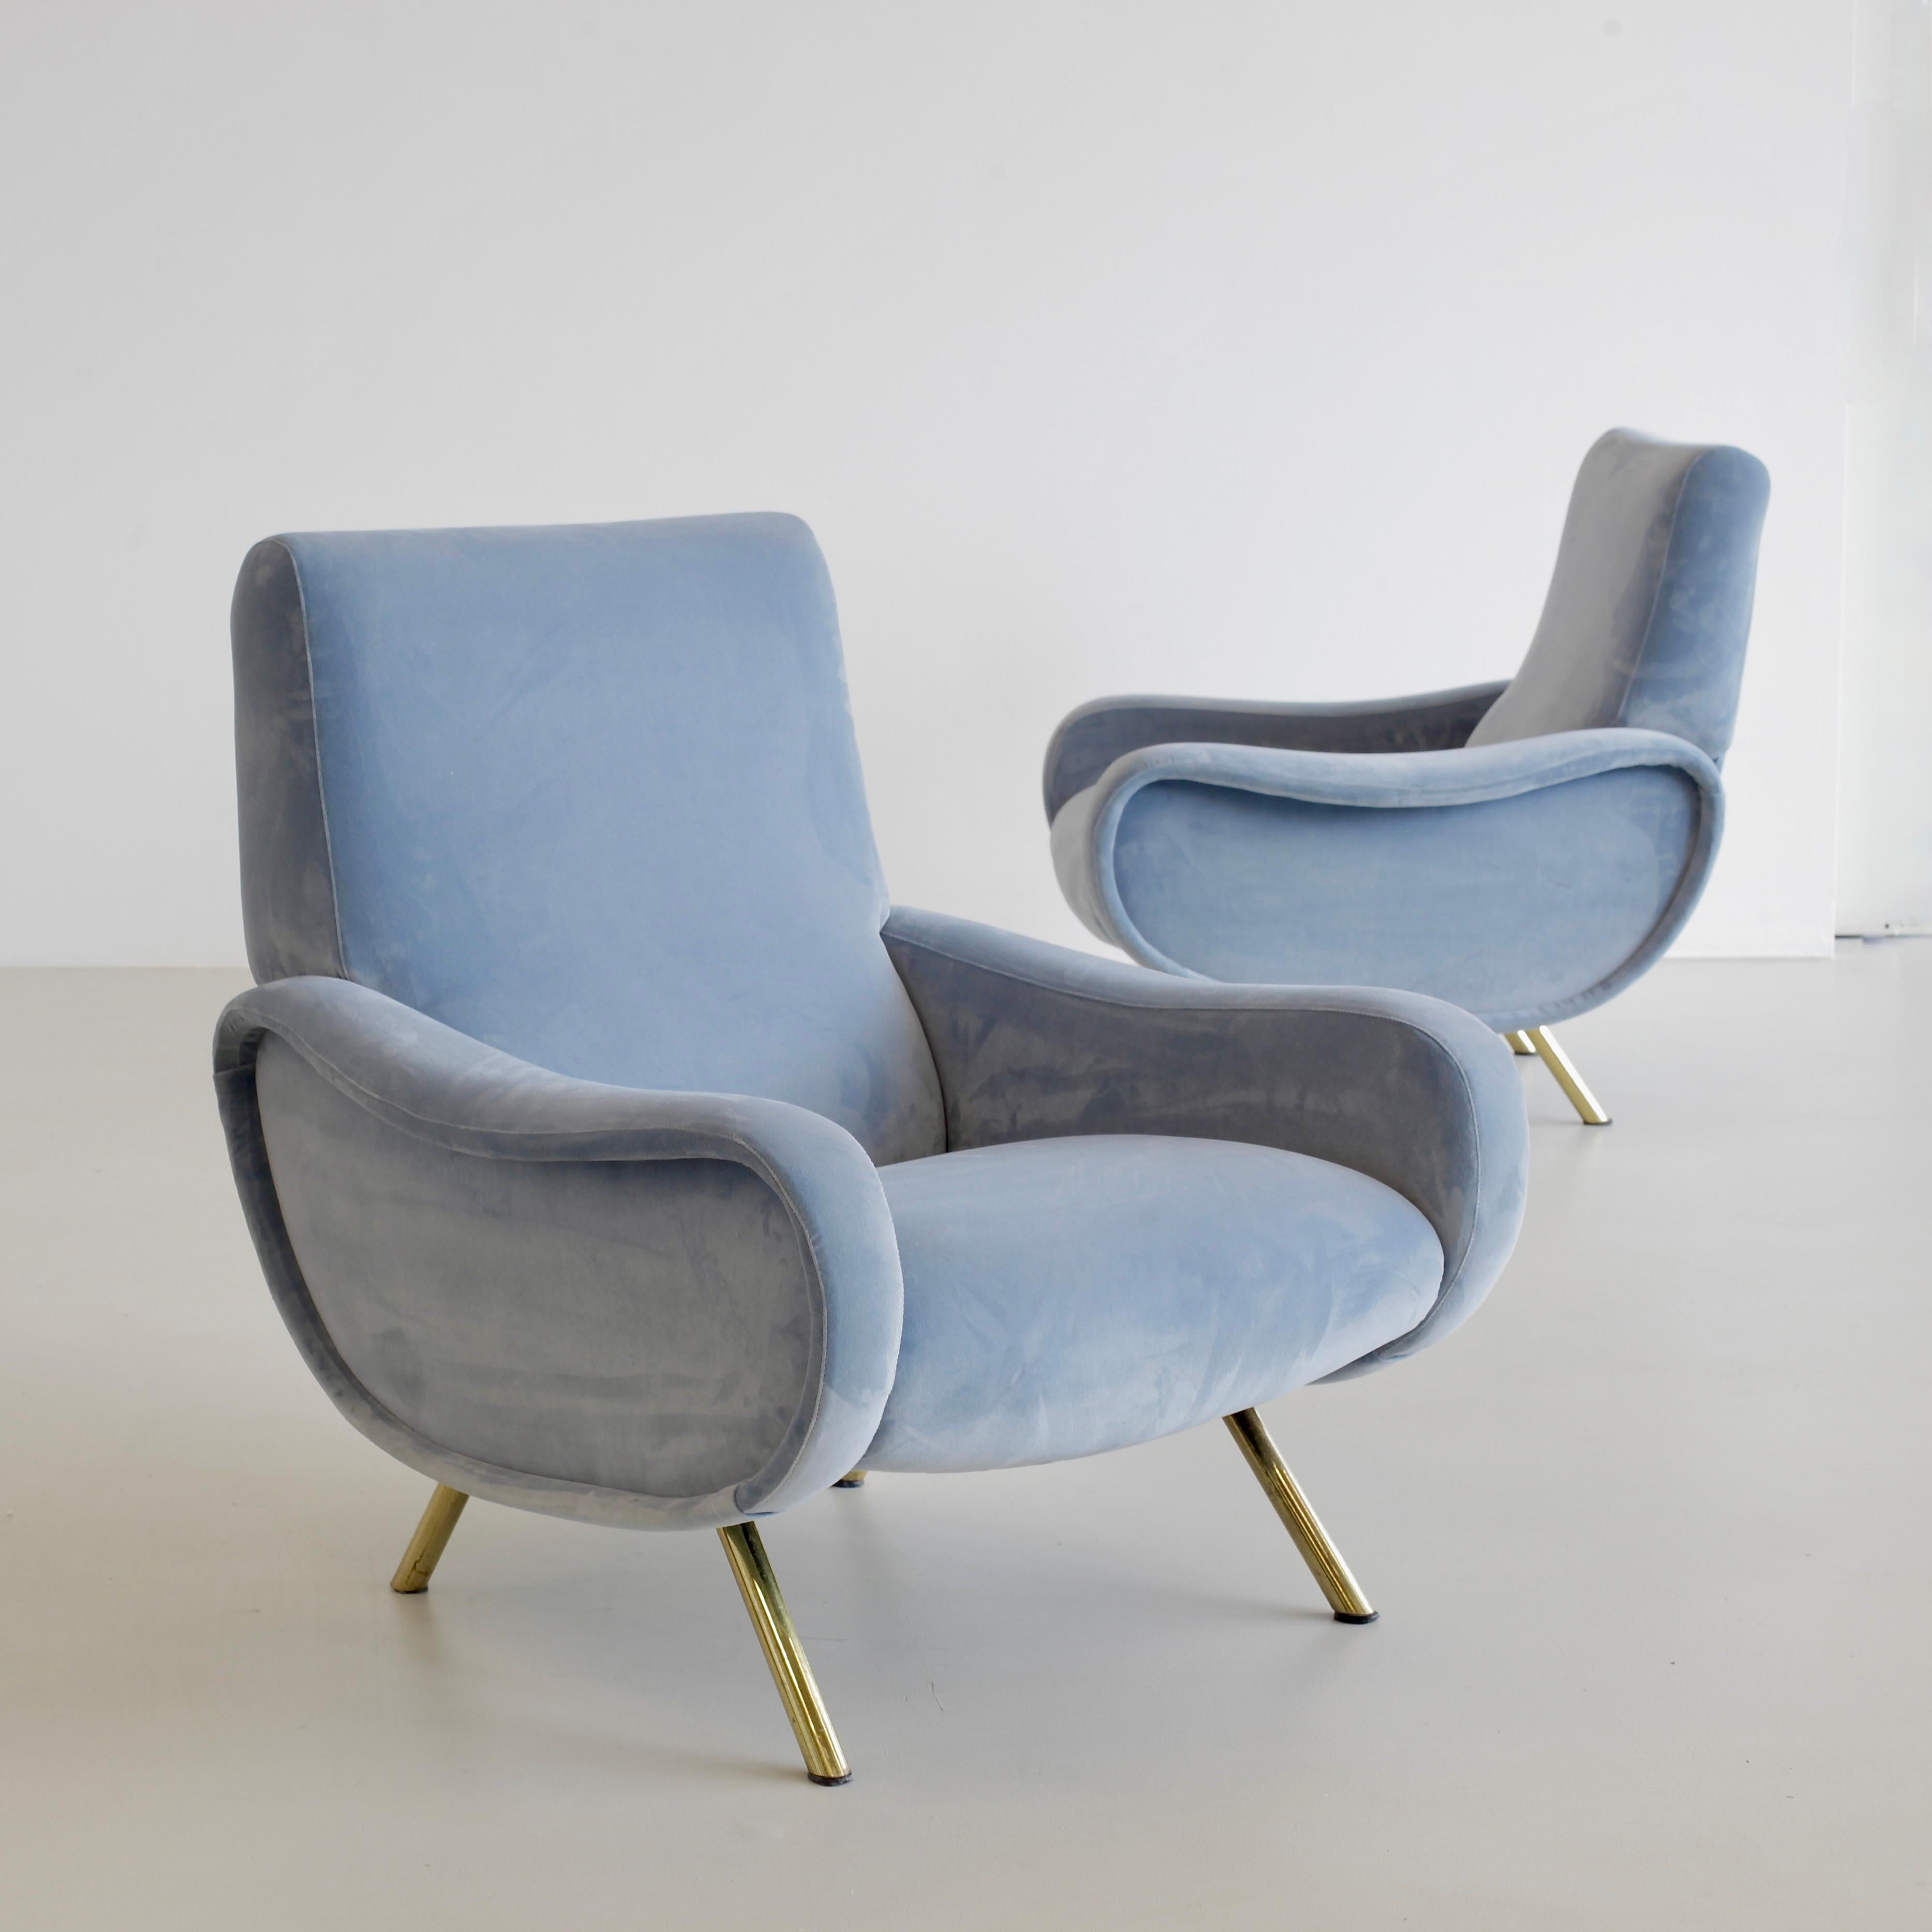 A pair of 'Lady Chairs', designed by Marco Zanuso. Italy, Arflex, 1951.

A pair of original 'LADY' lounge chairs designed by Marco Zanuso for Arflex, Milano. The chairs have been upholstered in blue velvet. Brass-coloured legs. Seat height 36 cm.